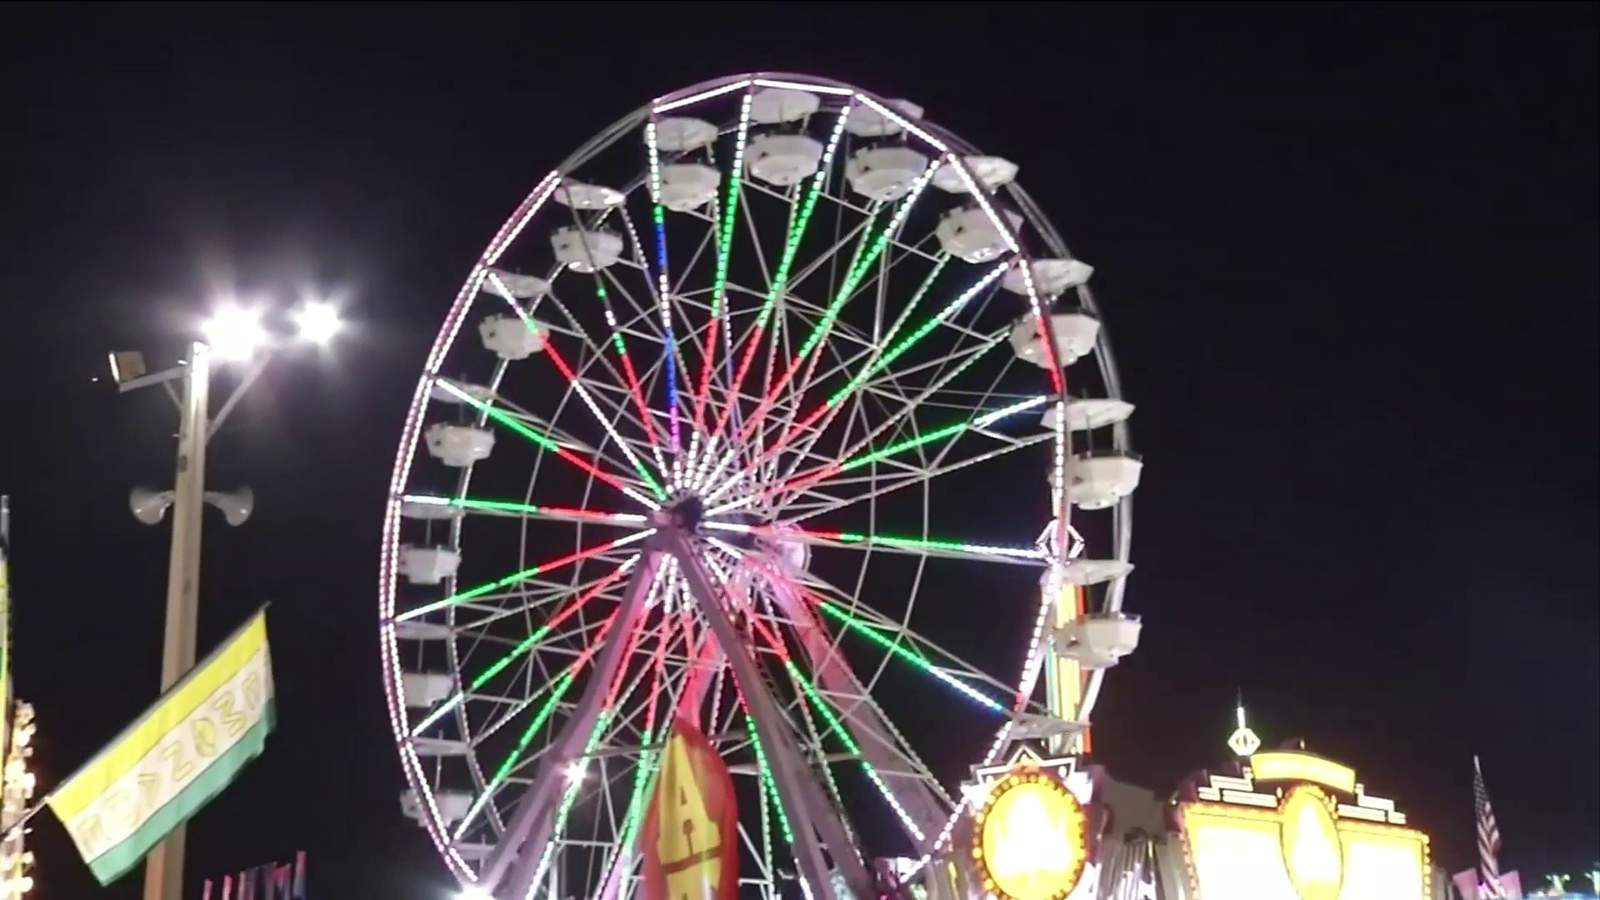 Looking for love? Ferris wheel speed dating event comes to Clay County Fair